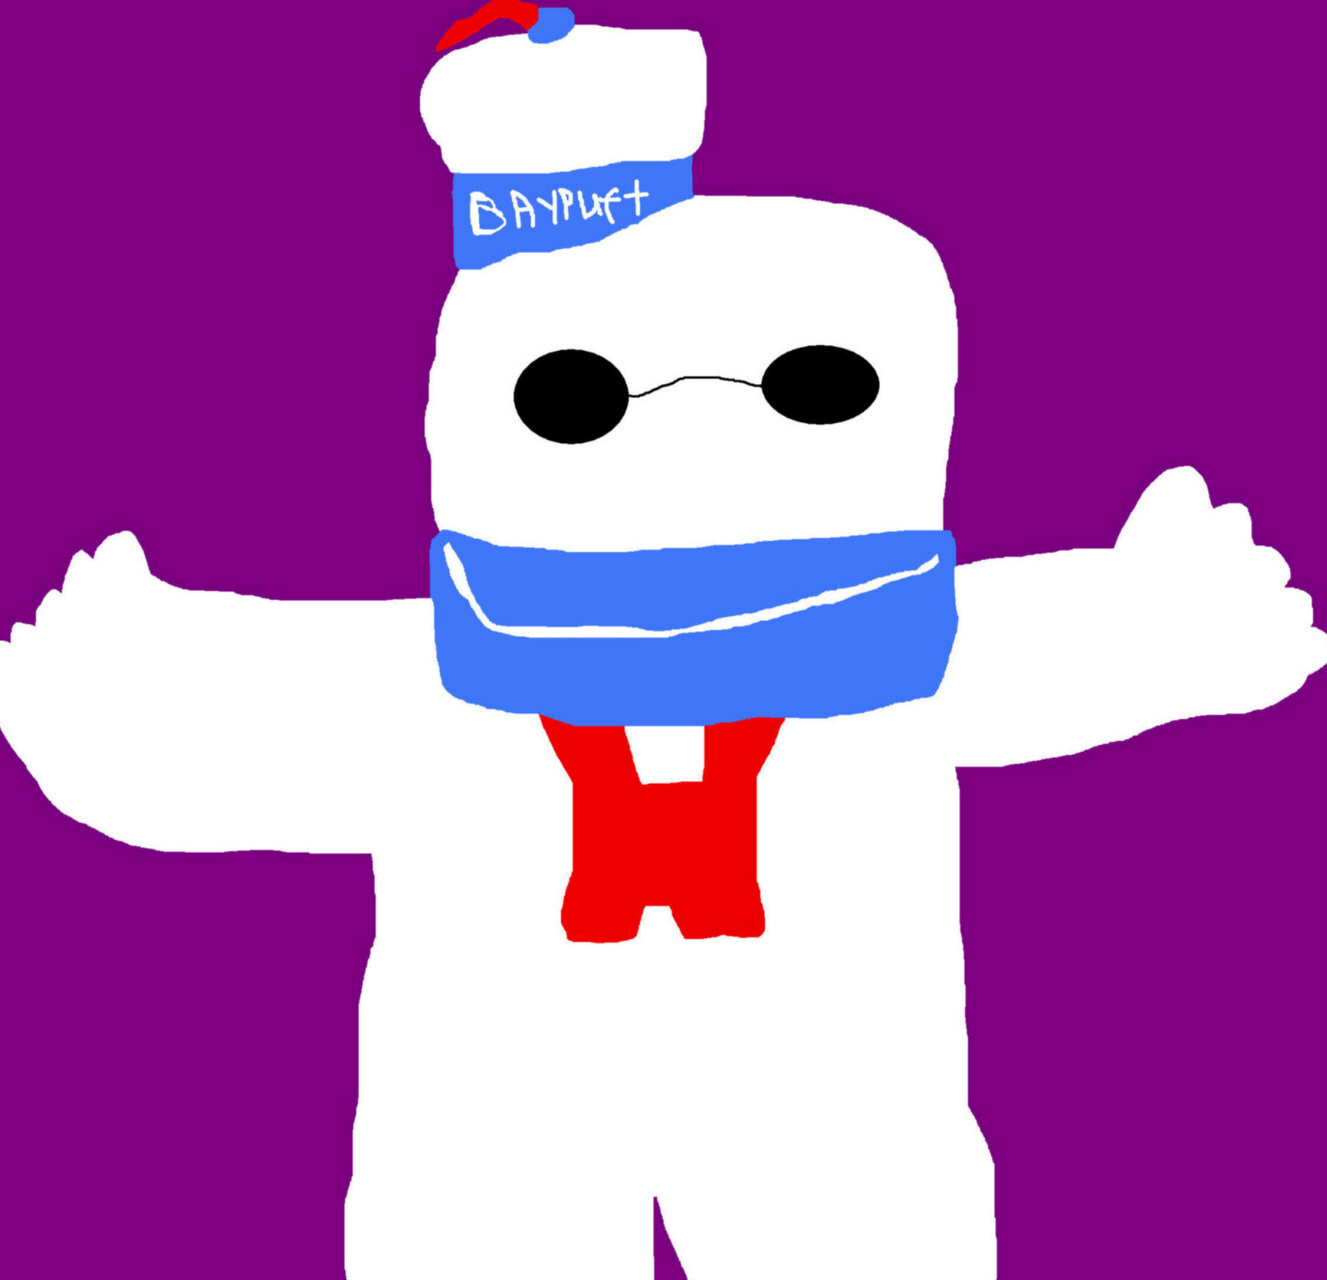 Baypuft Request MS Paint by Falconlobo